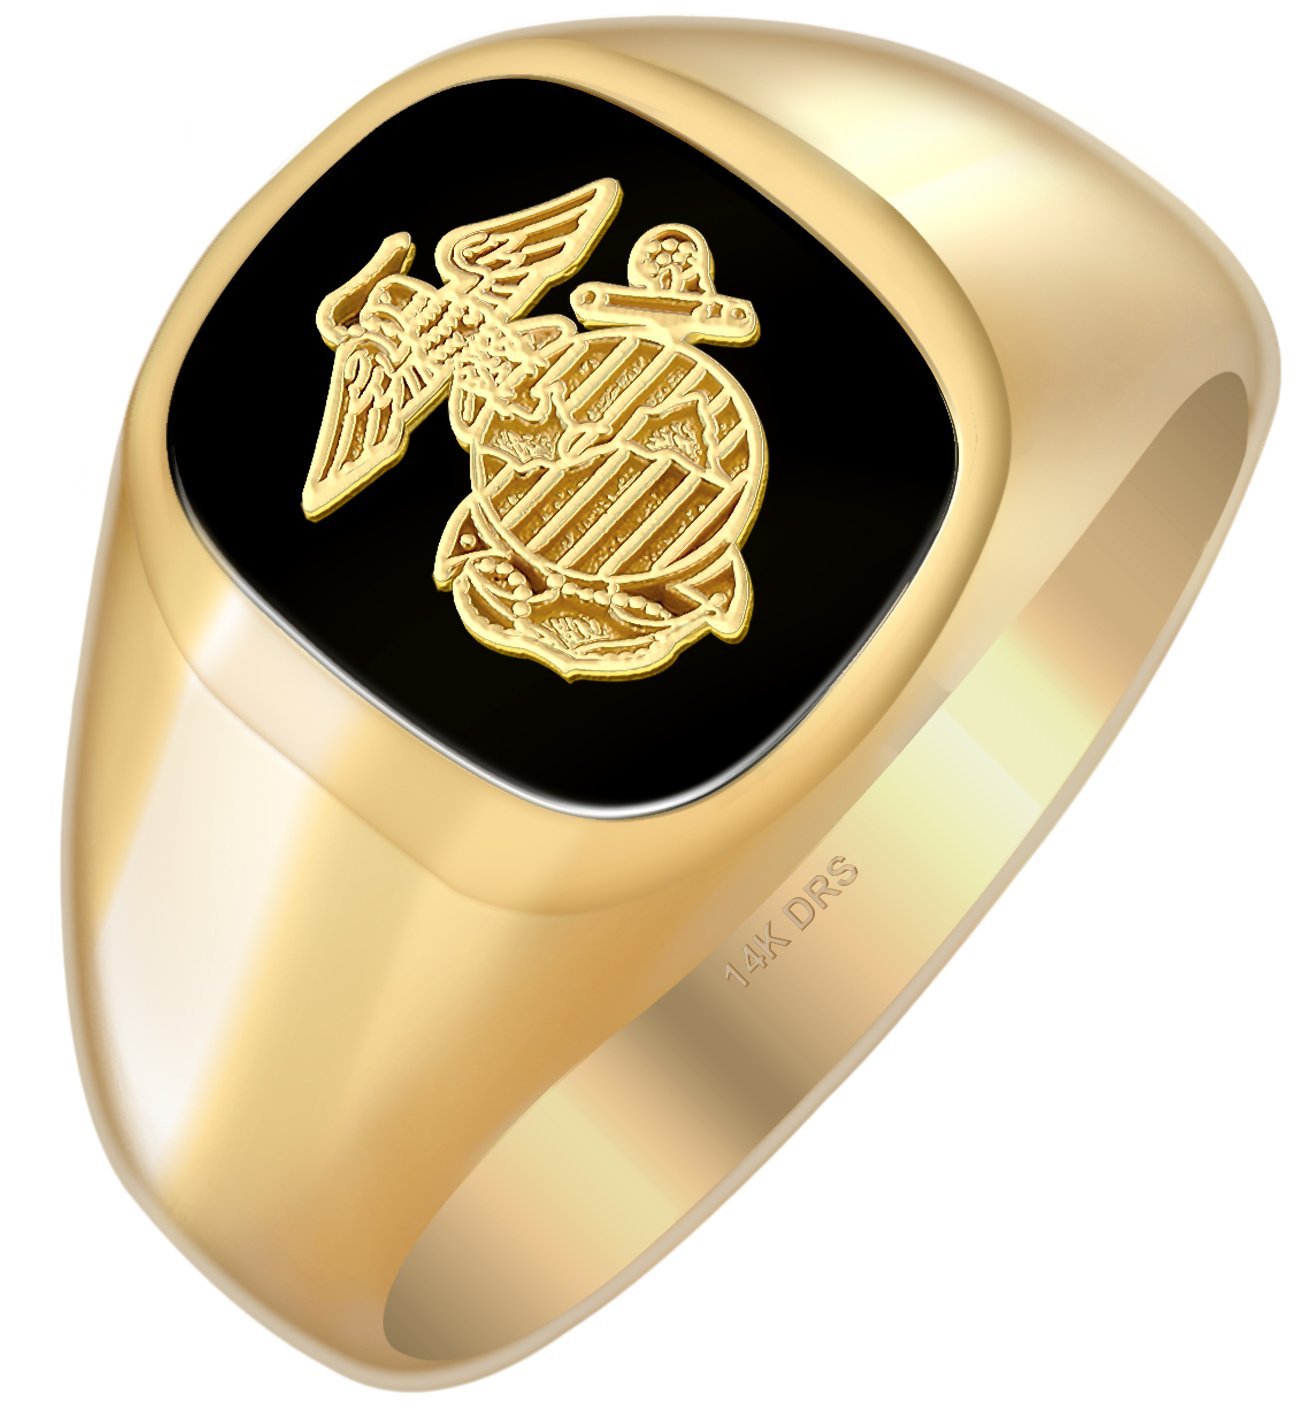 Tientallen koppeling kussen Yellow or White Gold US Marine Corps Solid Ring